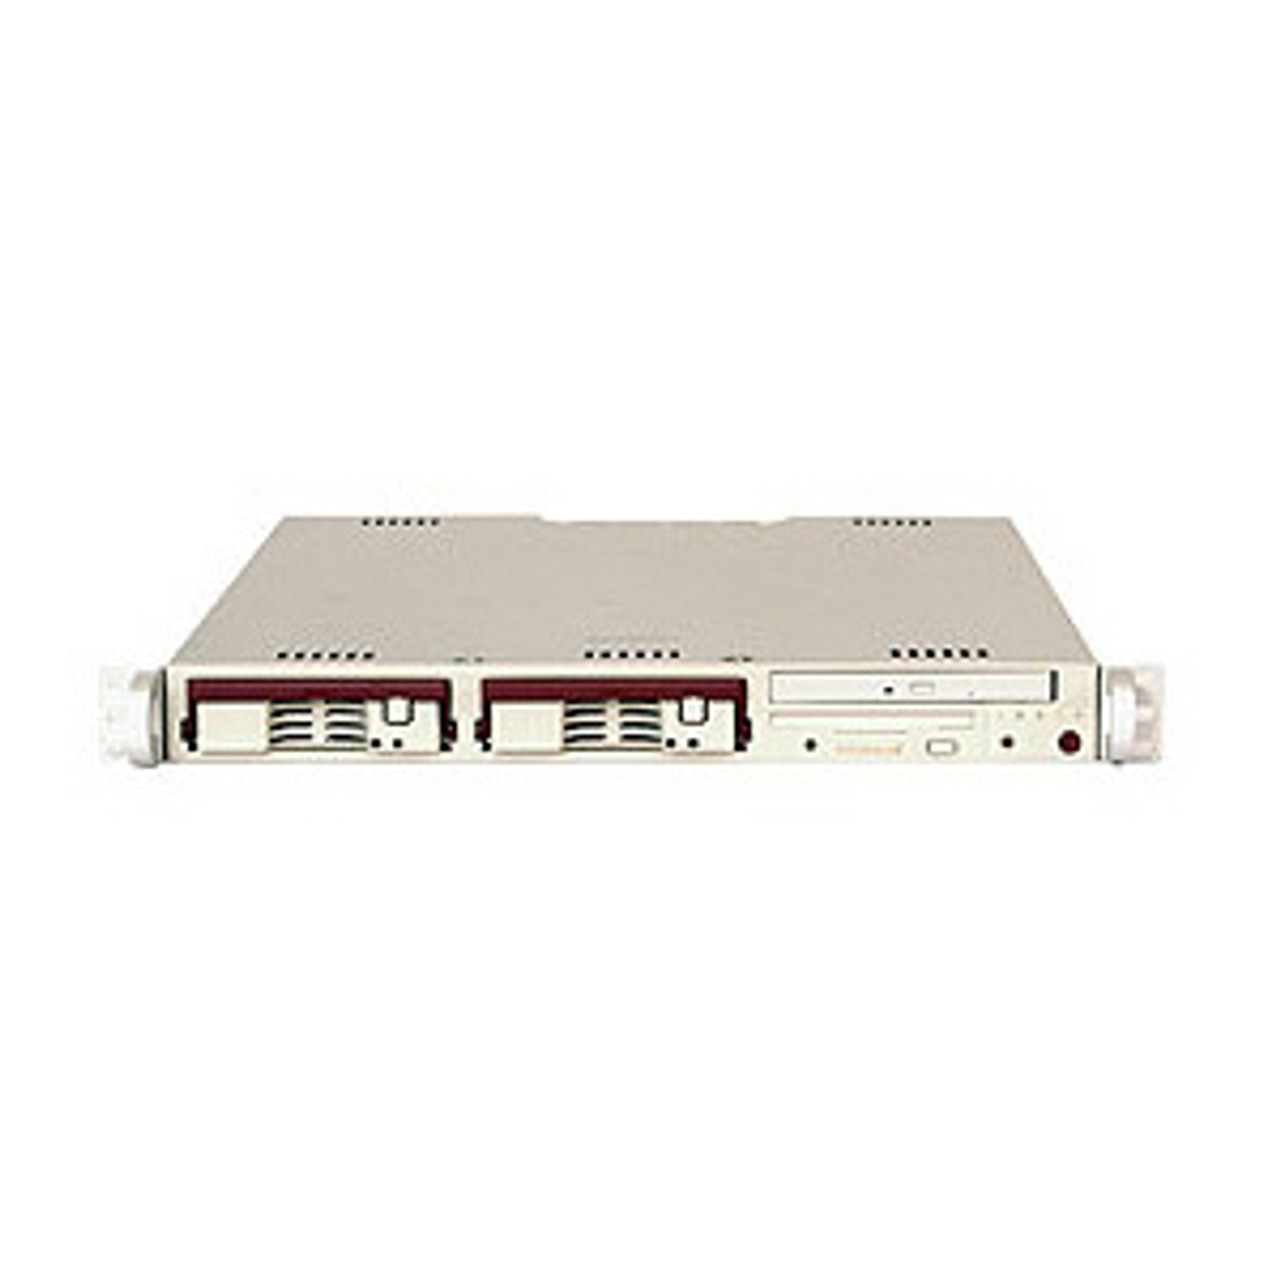 Supermicro SC811FT-260 Chassis - CSE-811FT-260B